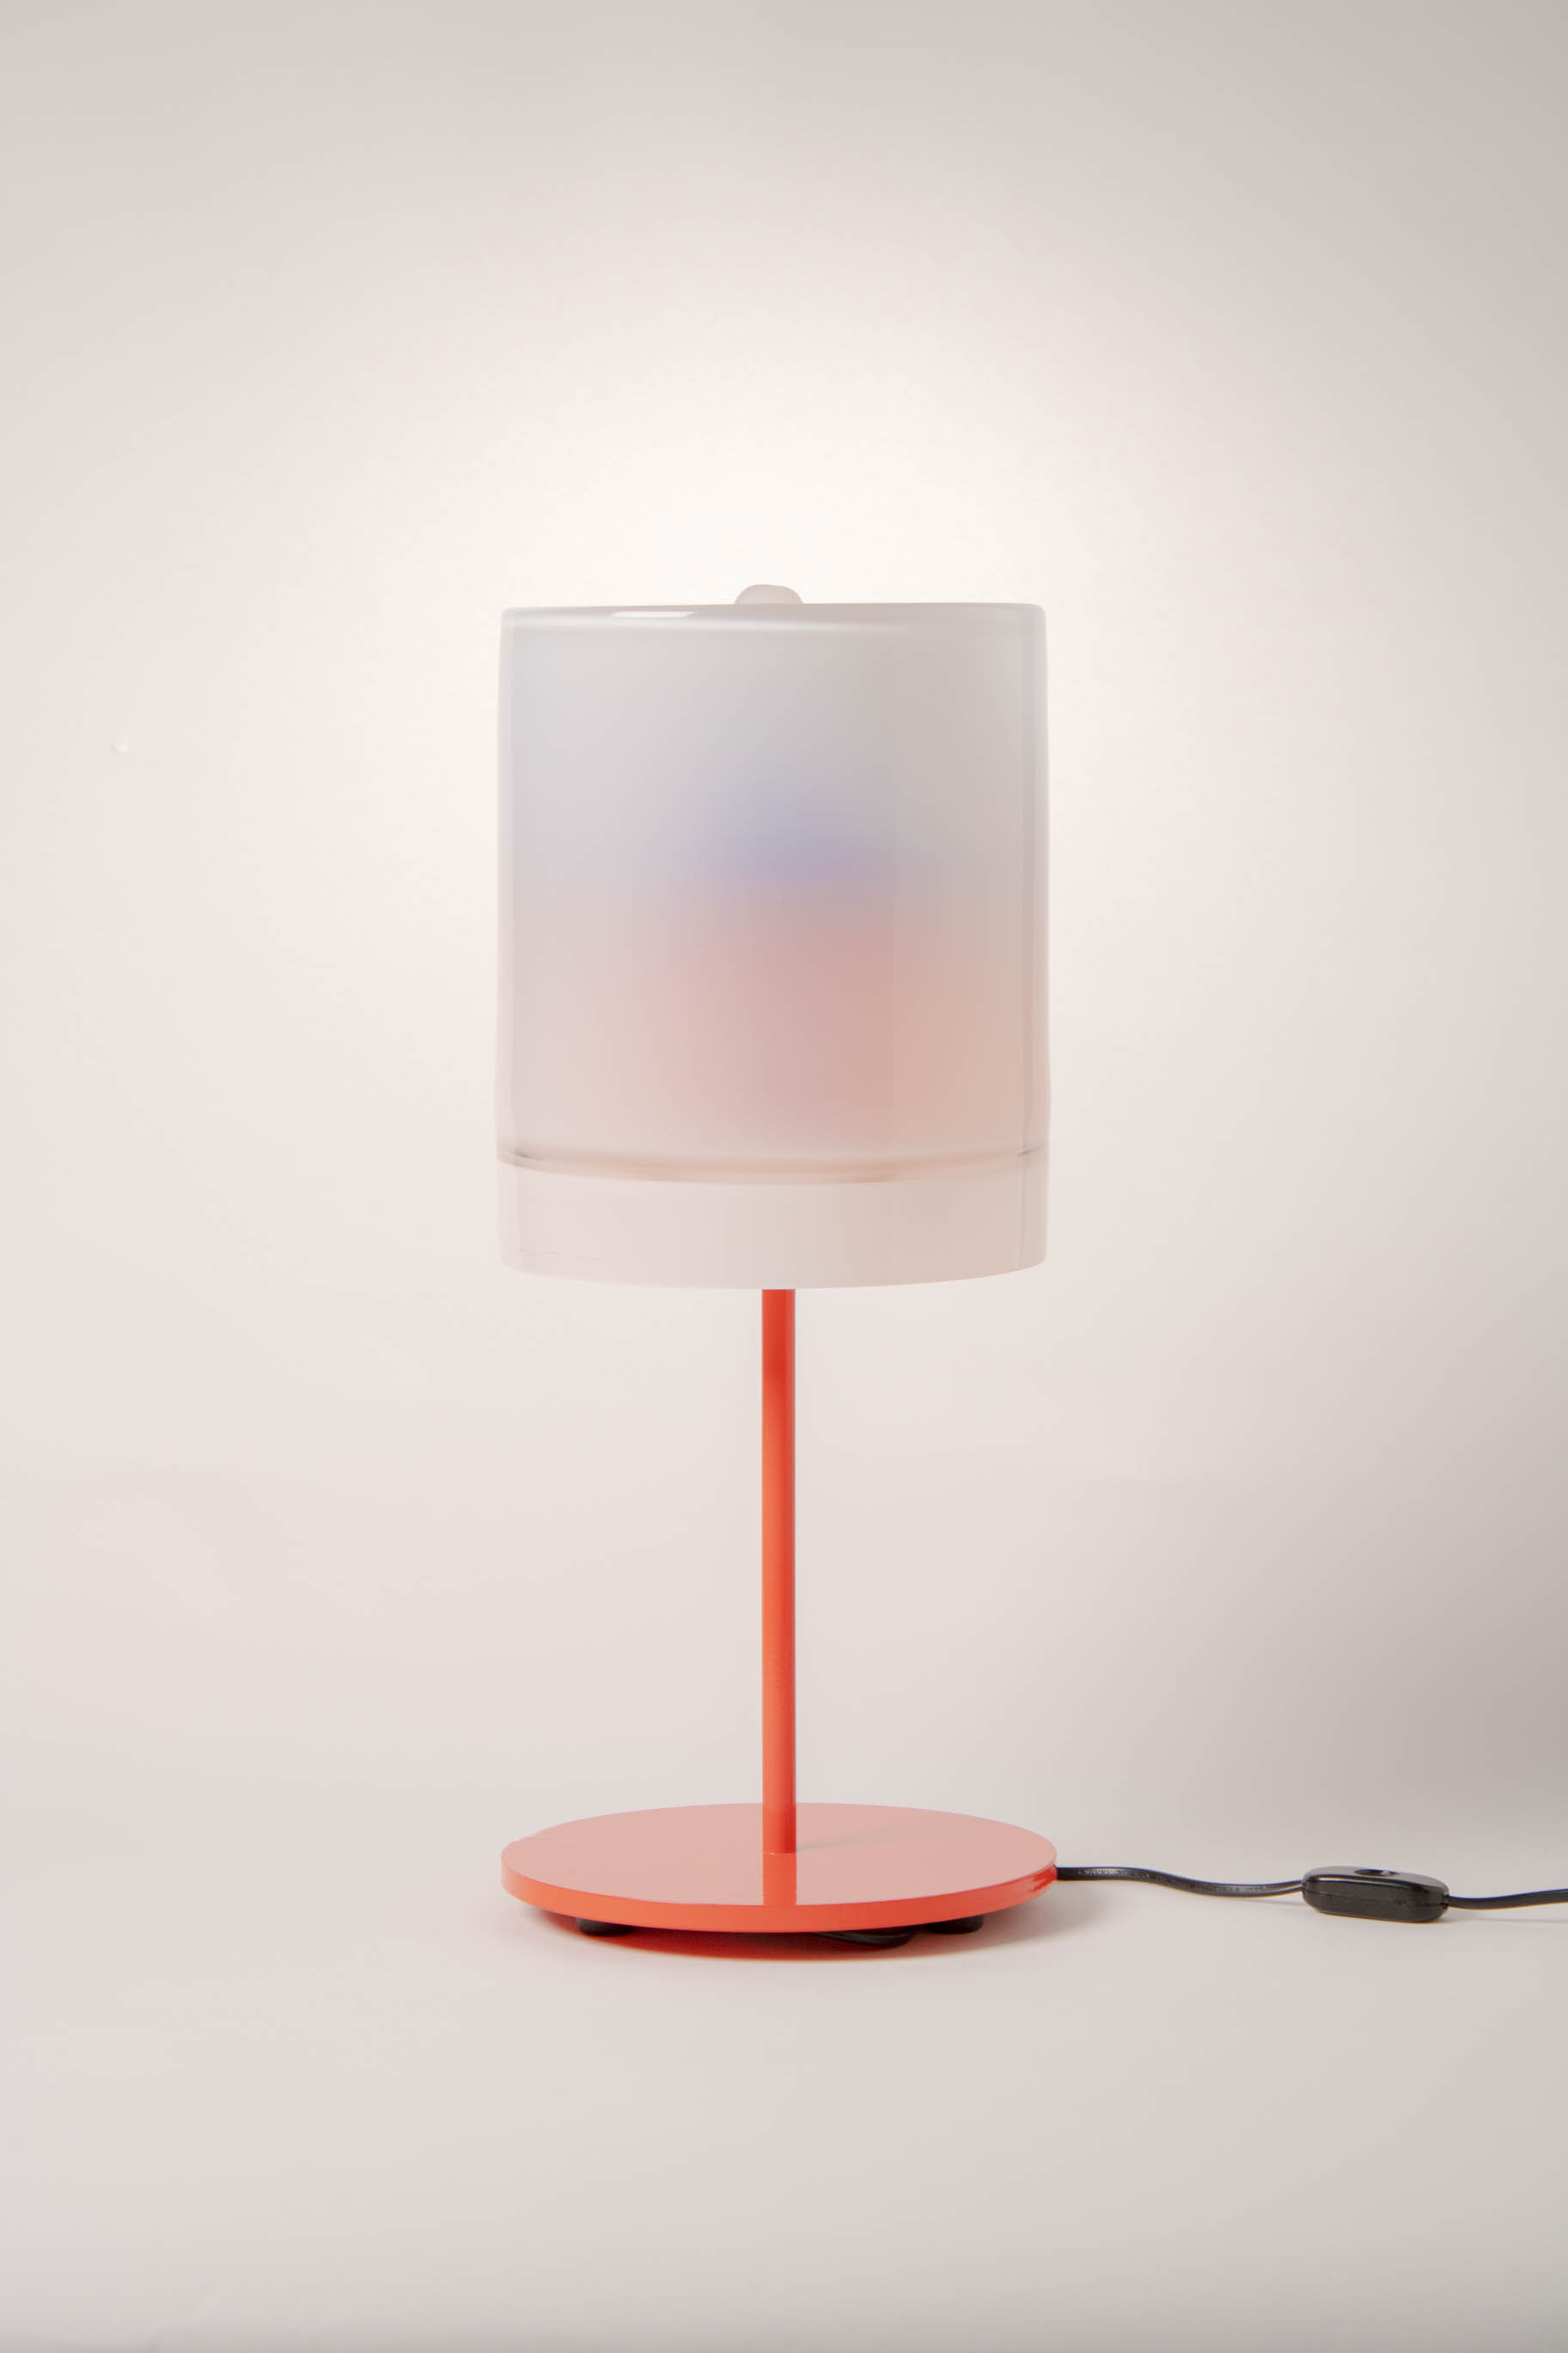 a lamp with a red metal base and white cylindrical shade against a white background.